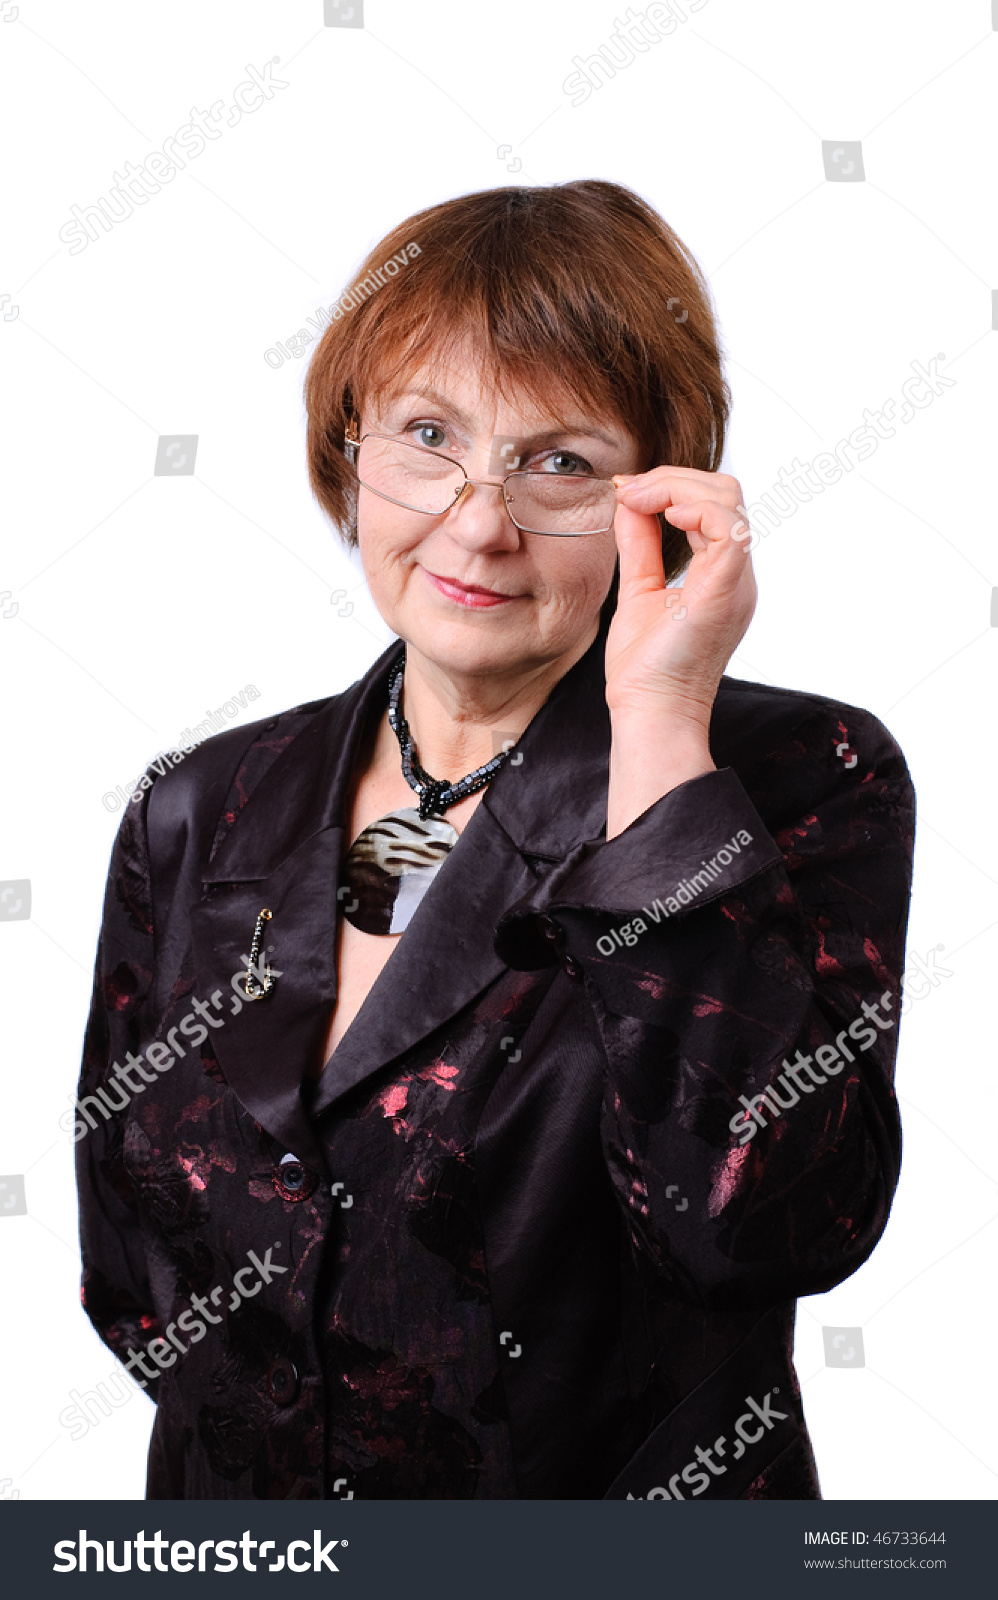 middle aged woman nude wearing glasses